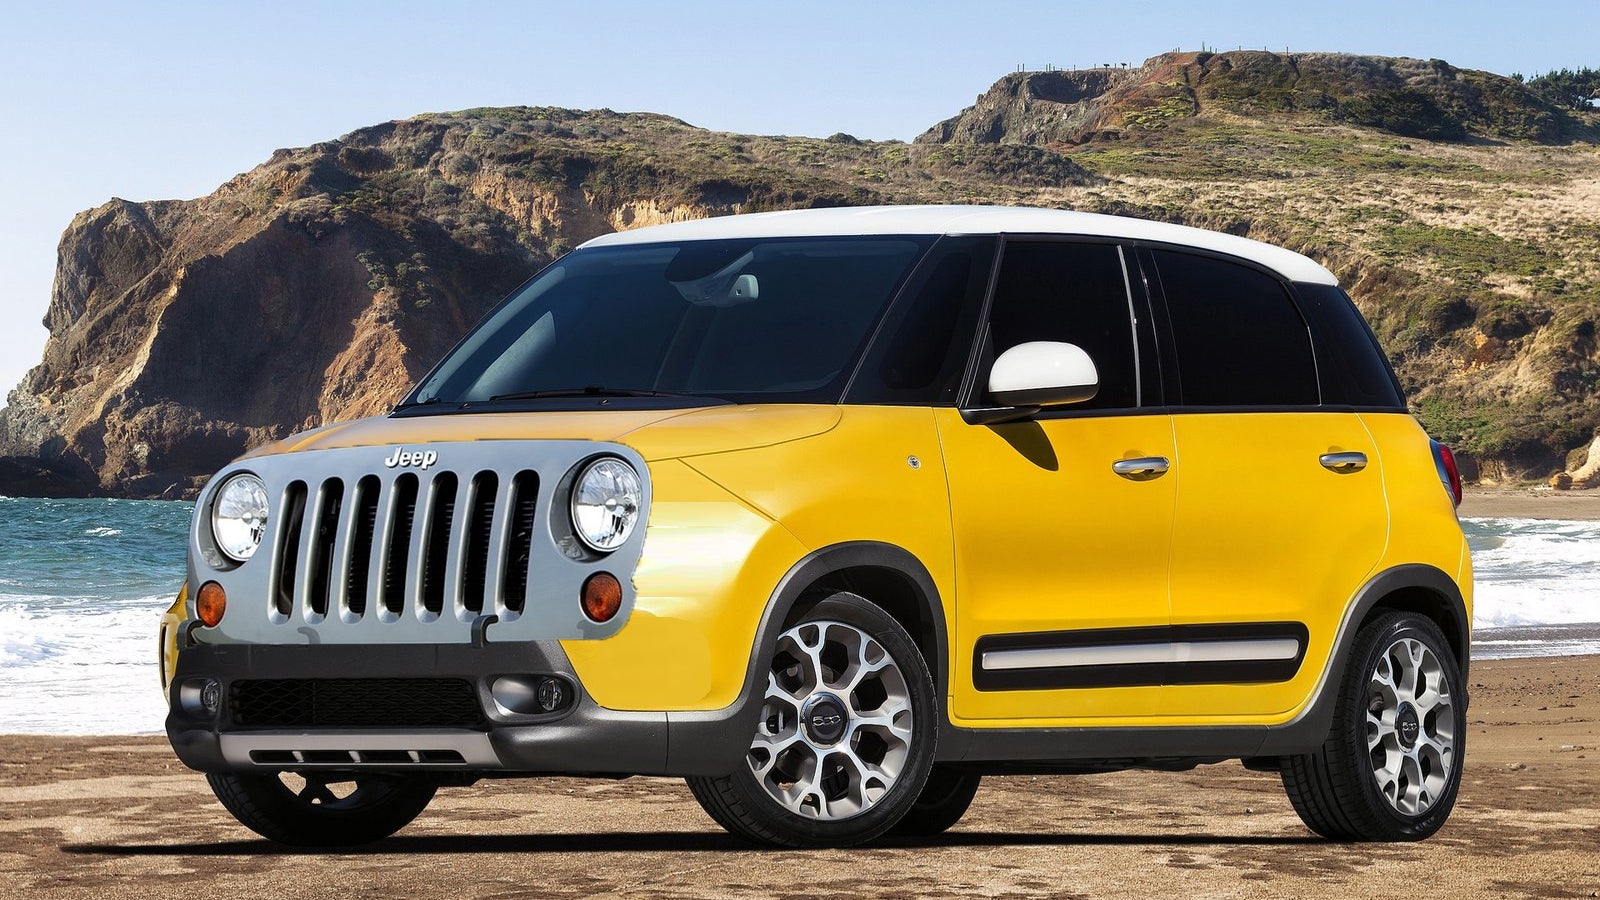 Will The Fiat 500 Baby Jeep Be The Jeepster?